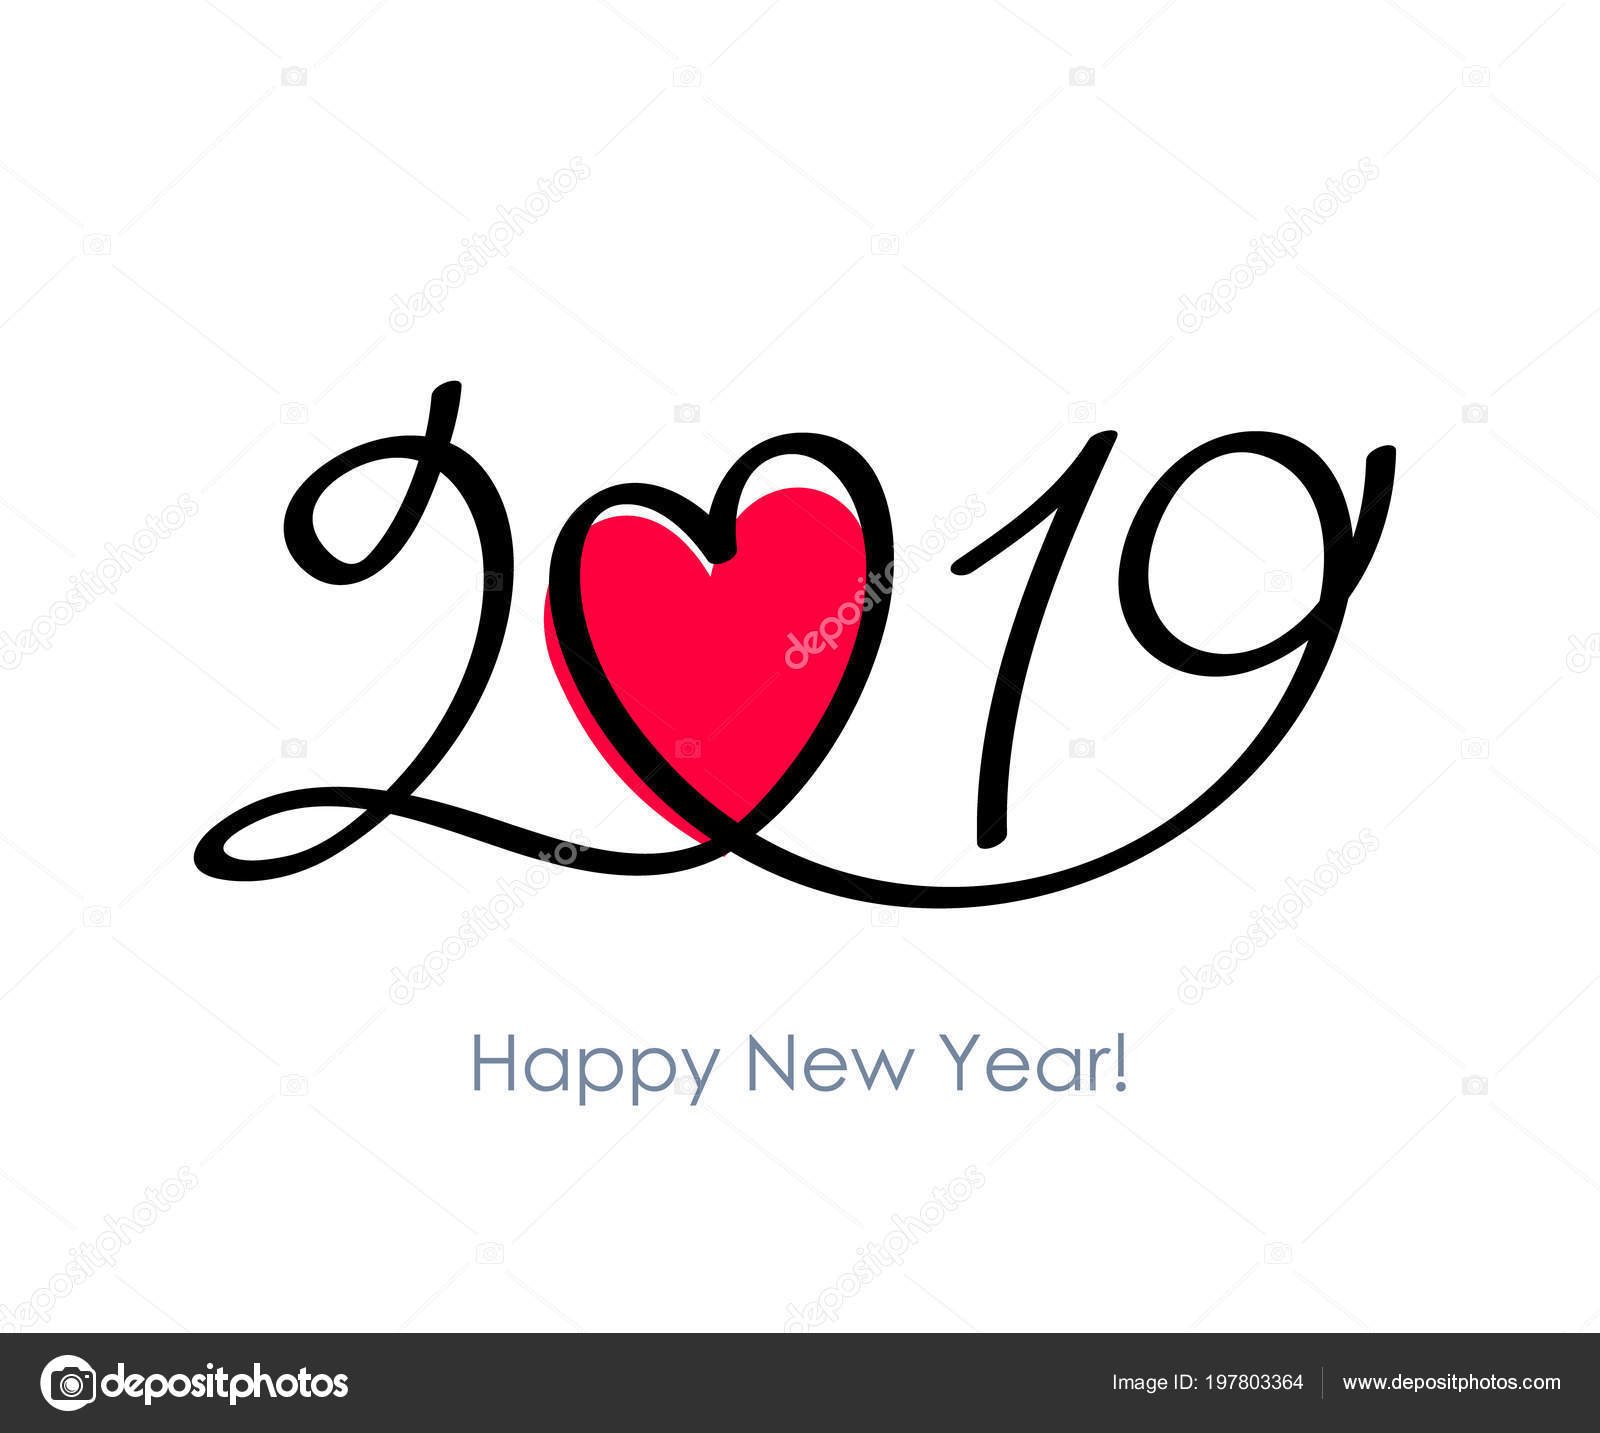 19 Happy New Year Background Seasonal Greeting Card Template Vector Image By C Rea Molko Vector Stock